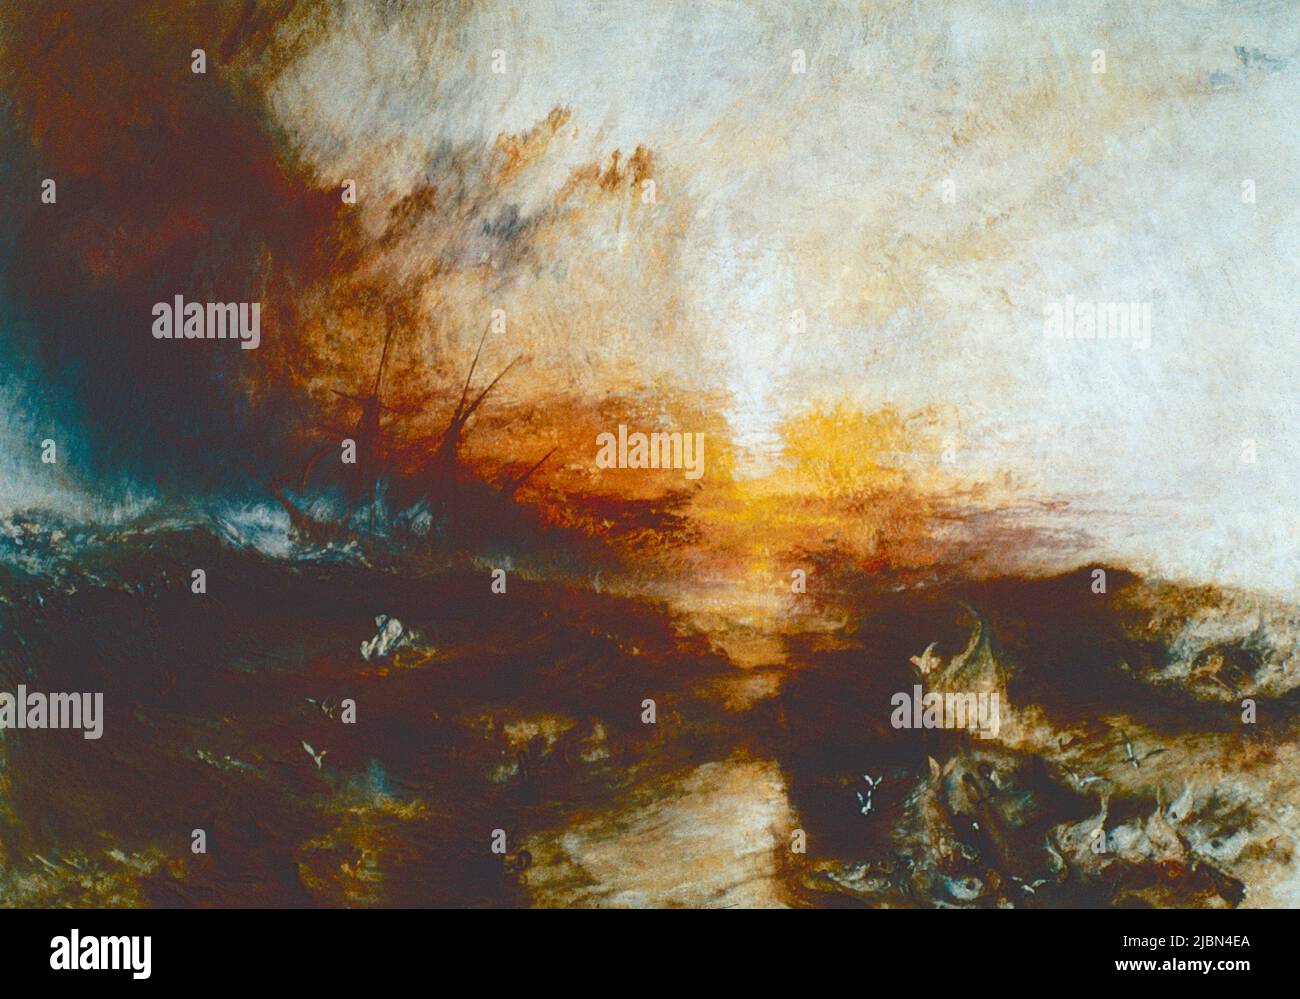 The Slave Ship, painting by British artist Joseph Mallord William Turner, 1840 Stock Photo